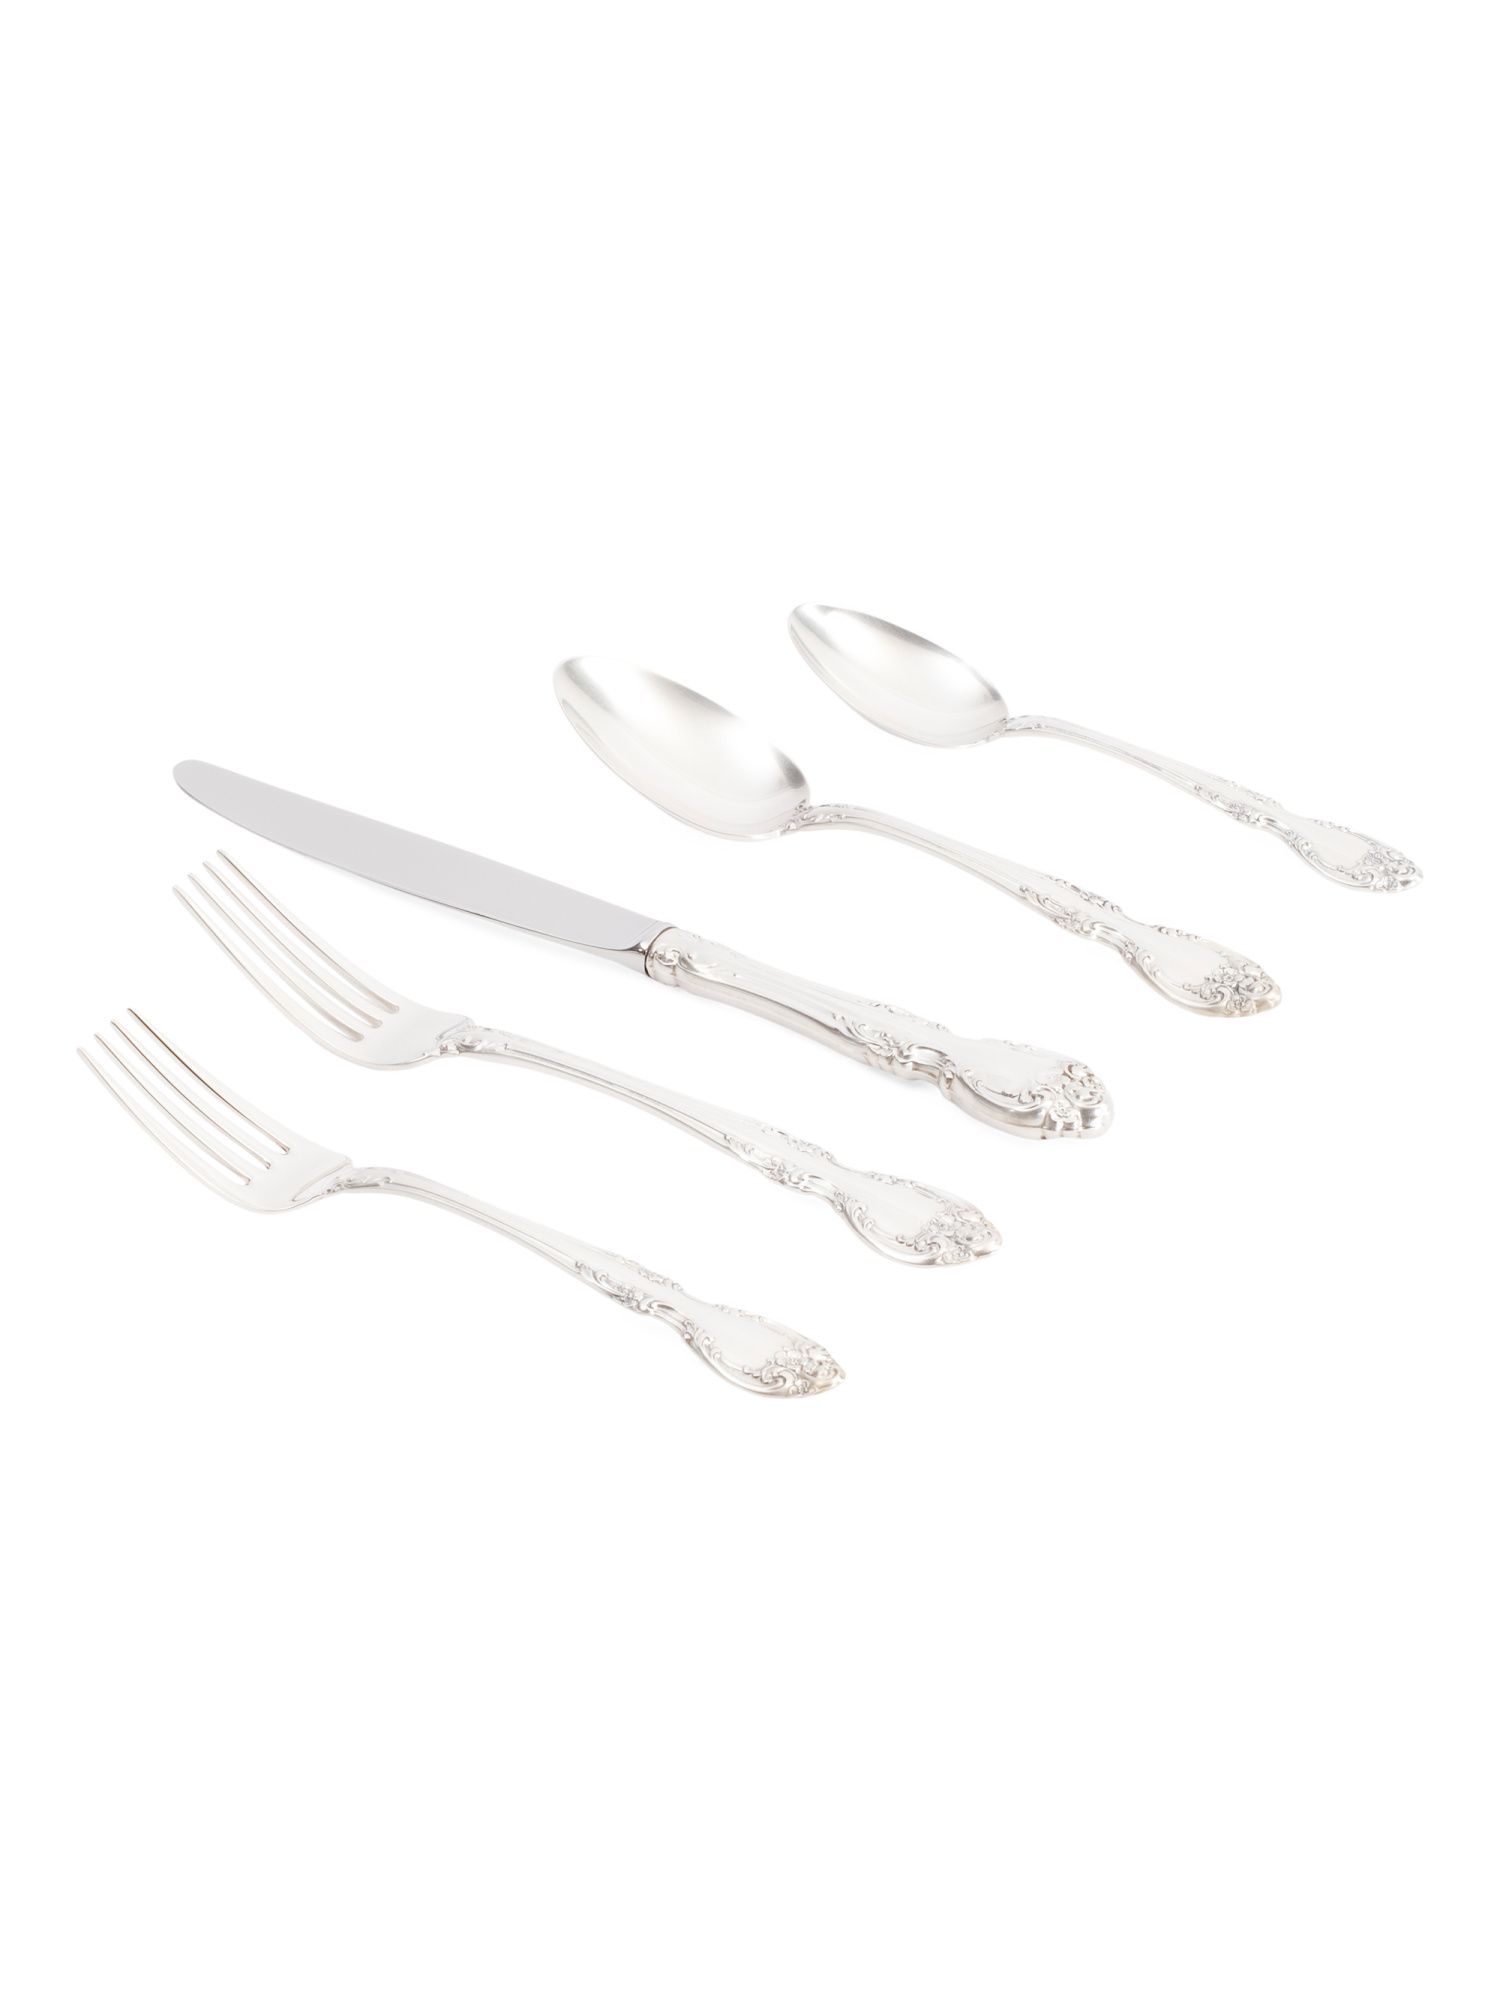 Made In Usa 5pc Sterling Silver Melrose Silverware Set | Marshalls